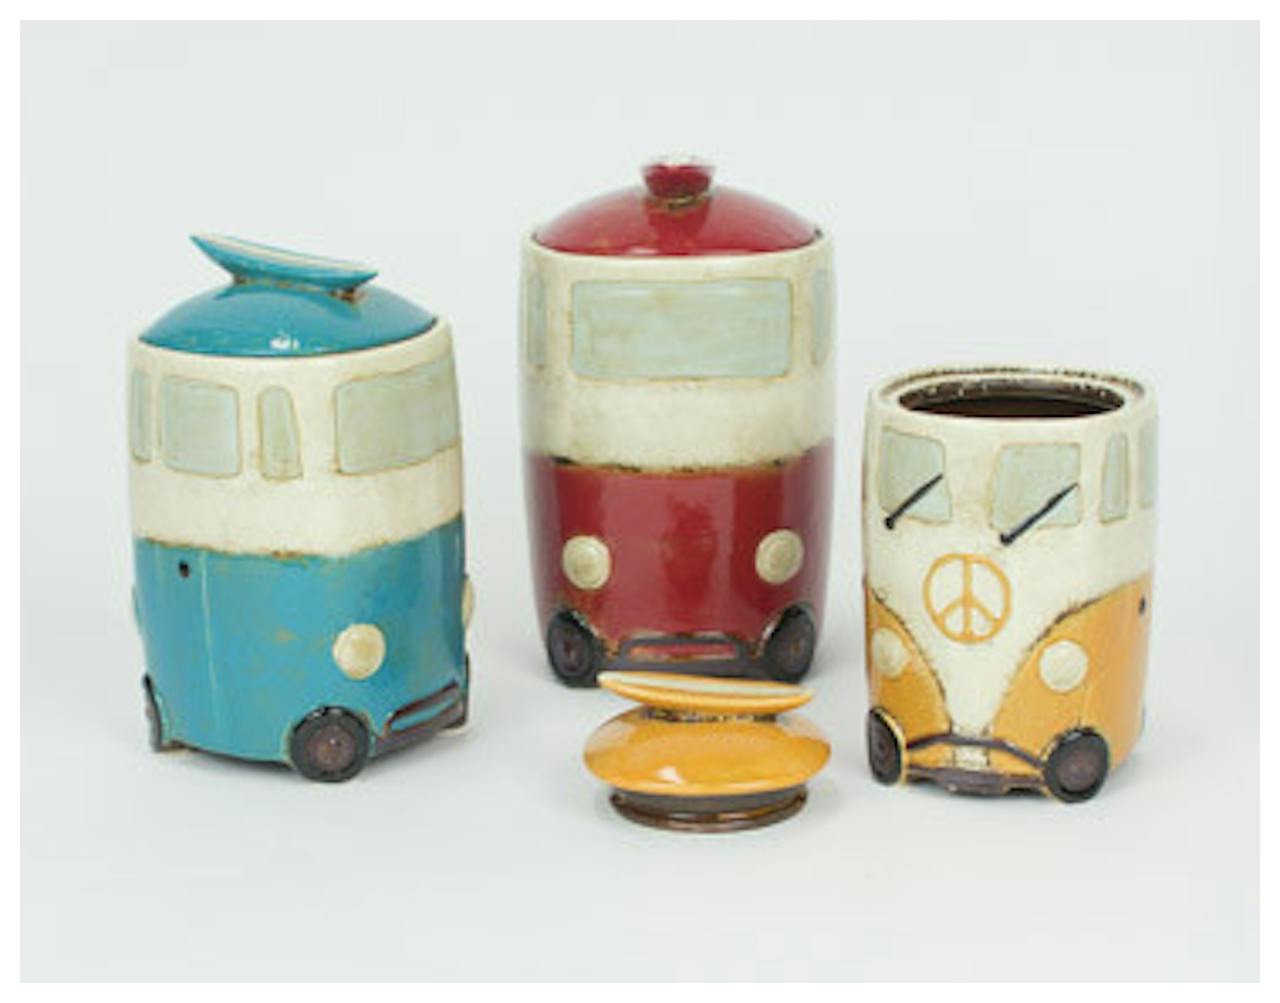 Download Volkswagen Bus Cookie Jar Canisters Set Of 3 Form Function Boutique Furniture In Solana Beach Ca